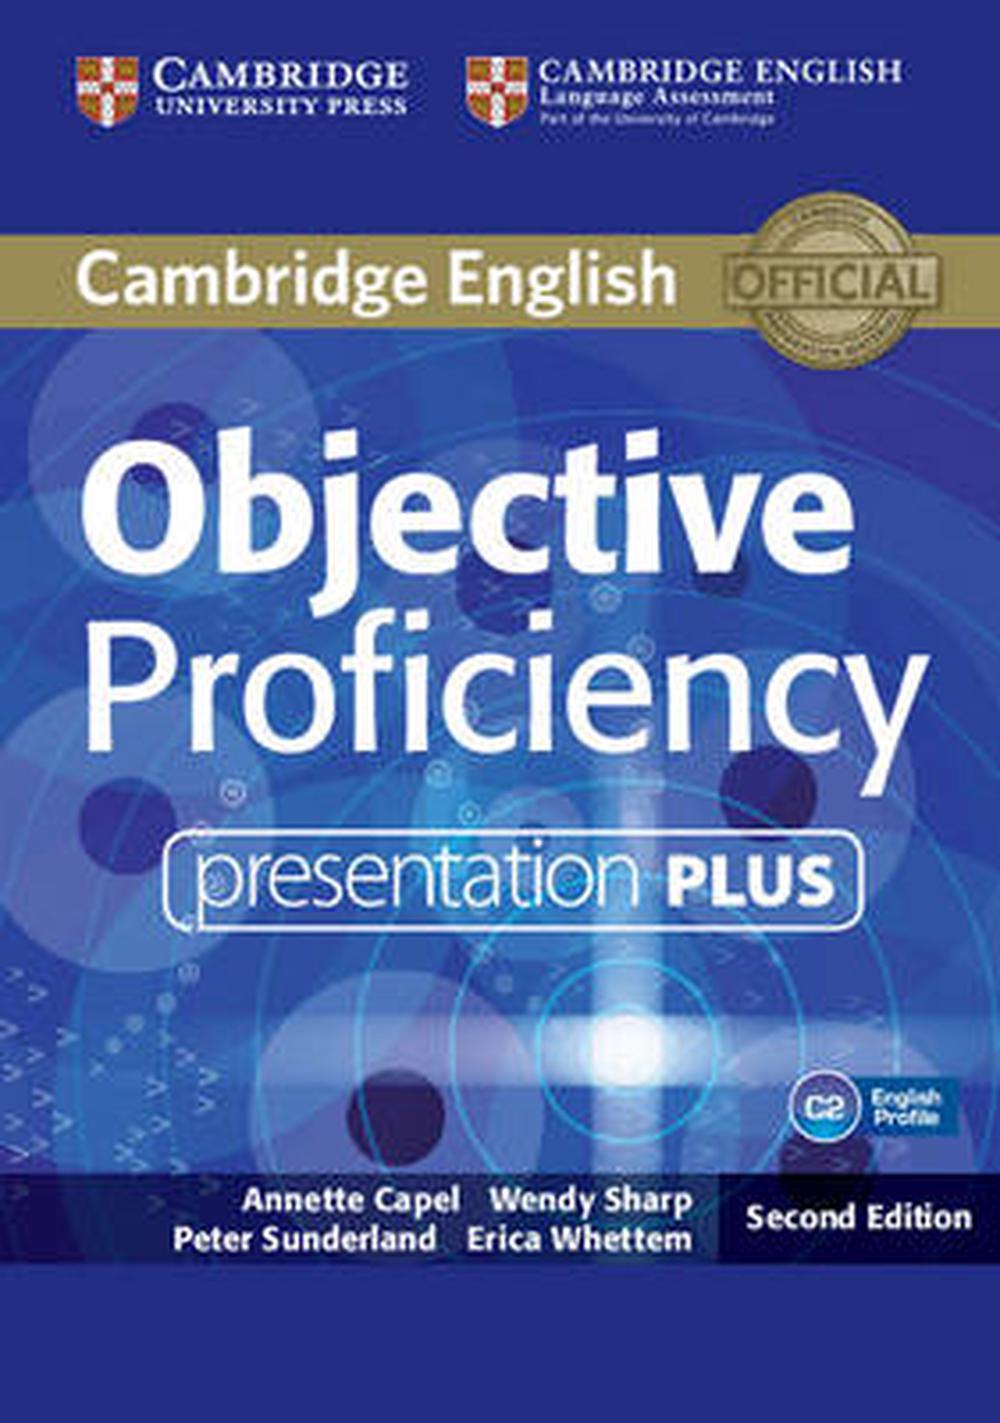 Buy　Presentation　online　by　The　Objective　Capel,　Proficiency　Annette　at　Plus　DVD-ROM　9781107446502　DVD,　Nile